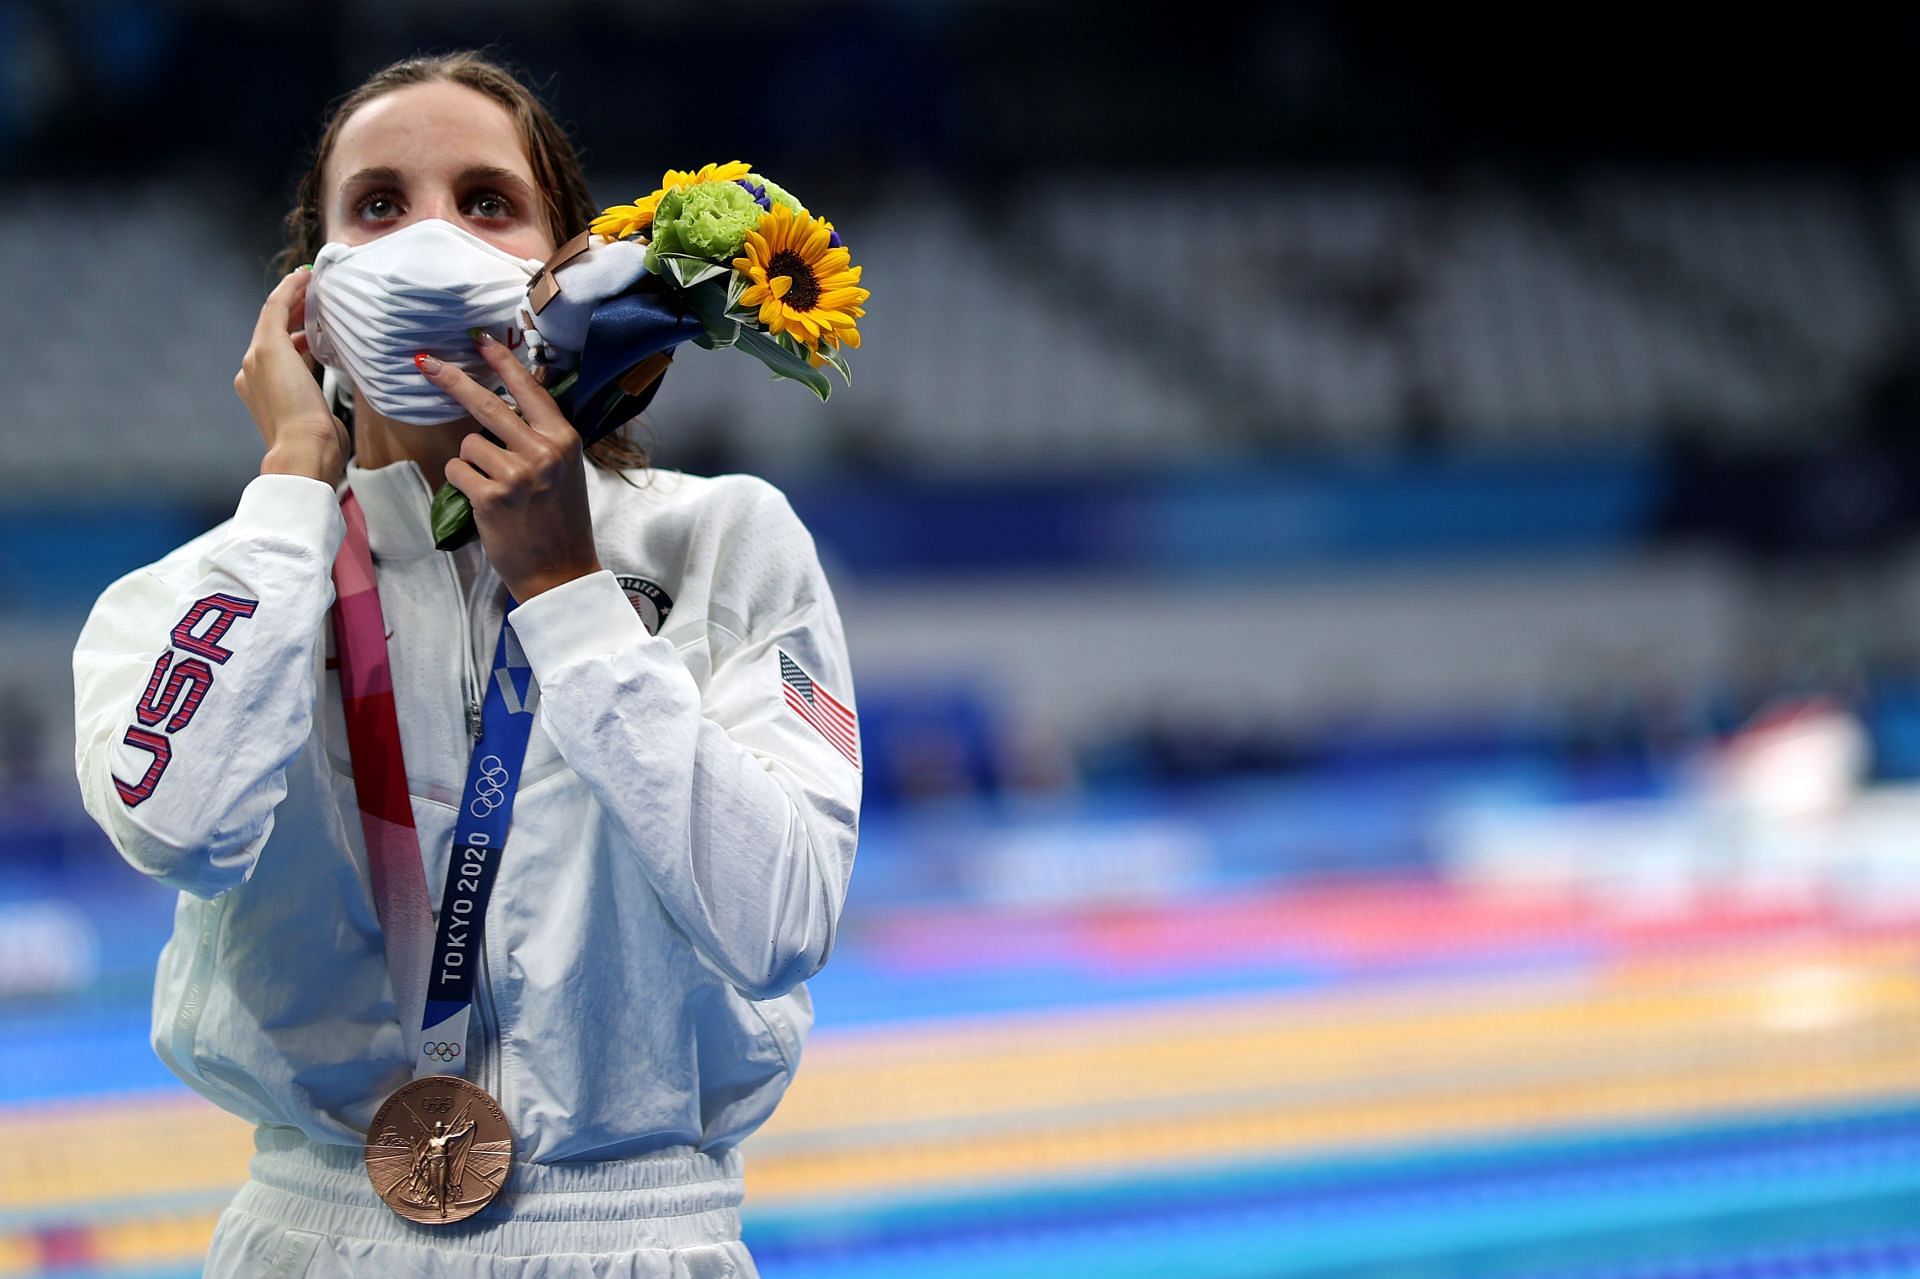 Smith wins bronze at the 2020 Olympics 